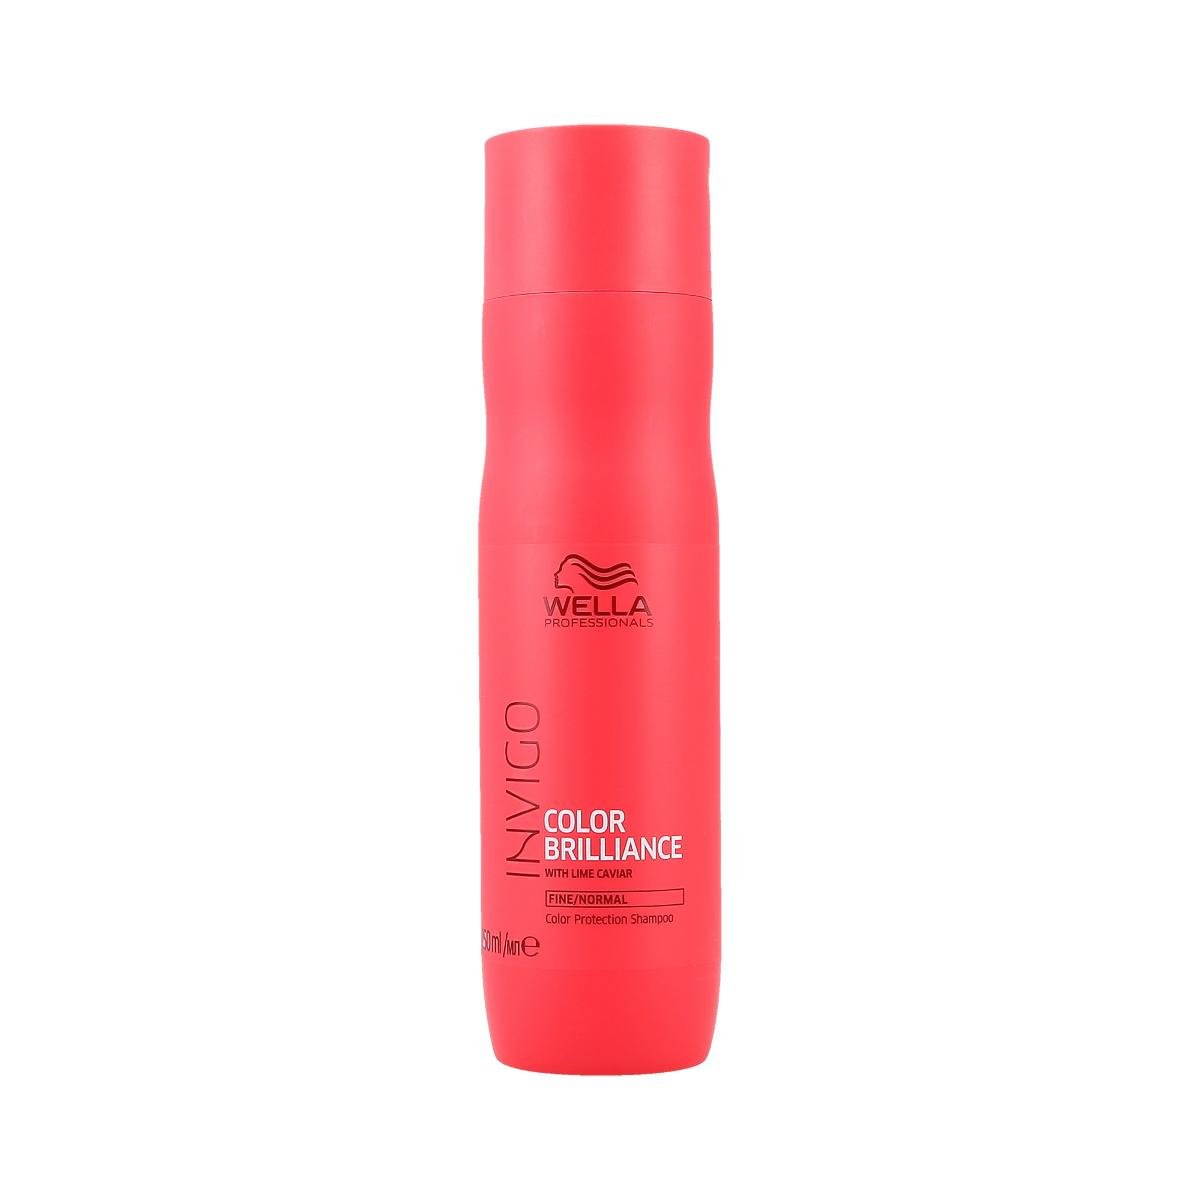 Wella Color Protection Shampoo Fine/Normal Hair 250.0 ml